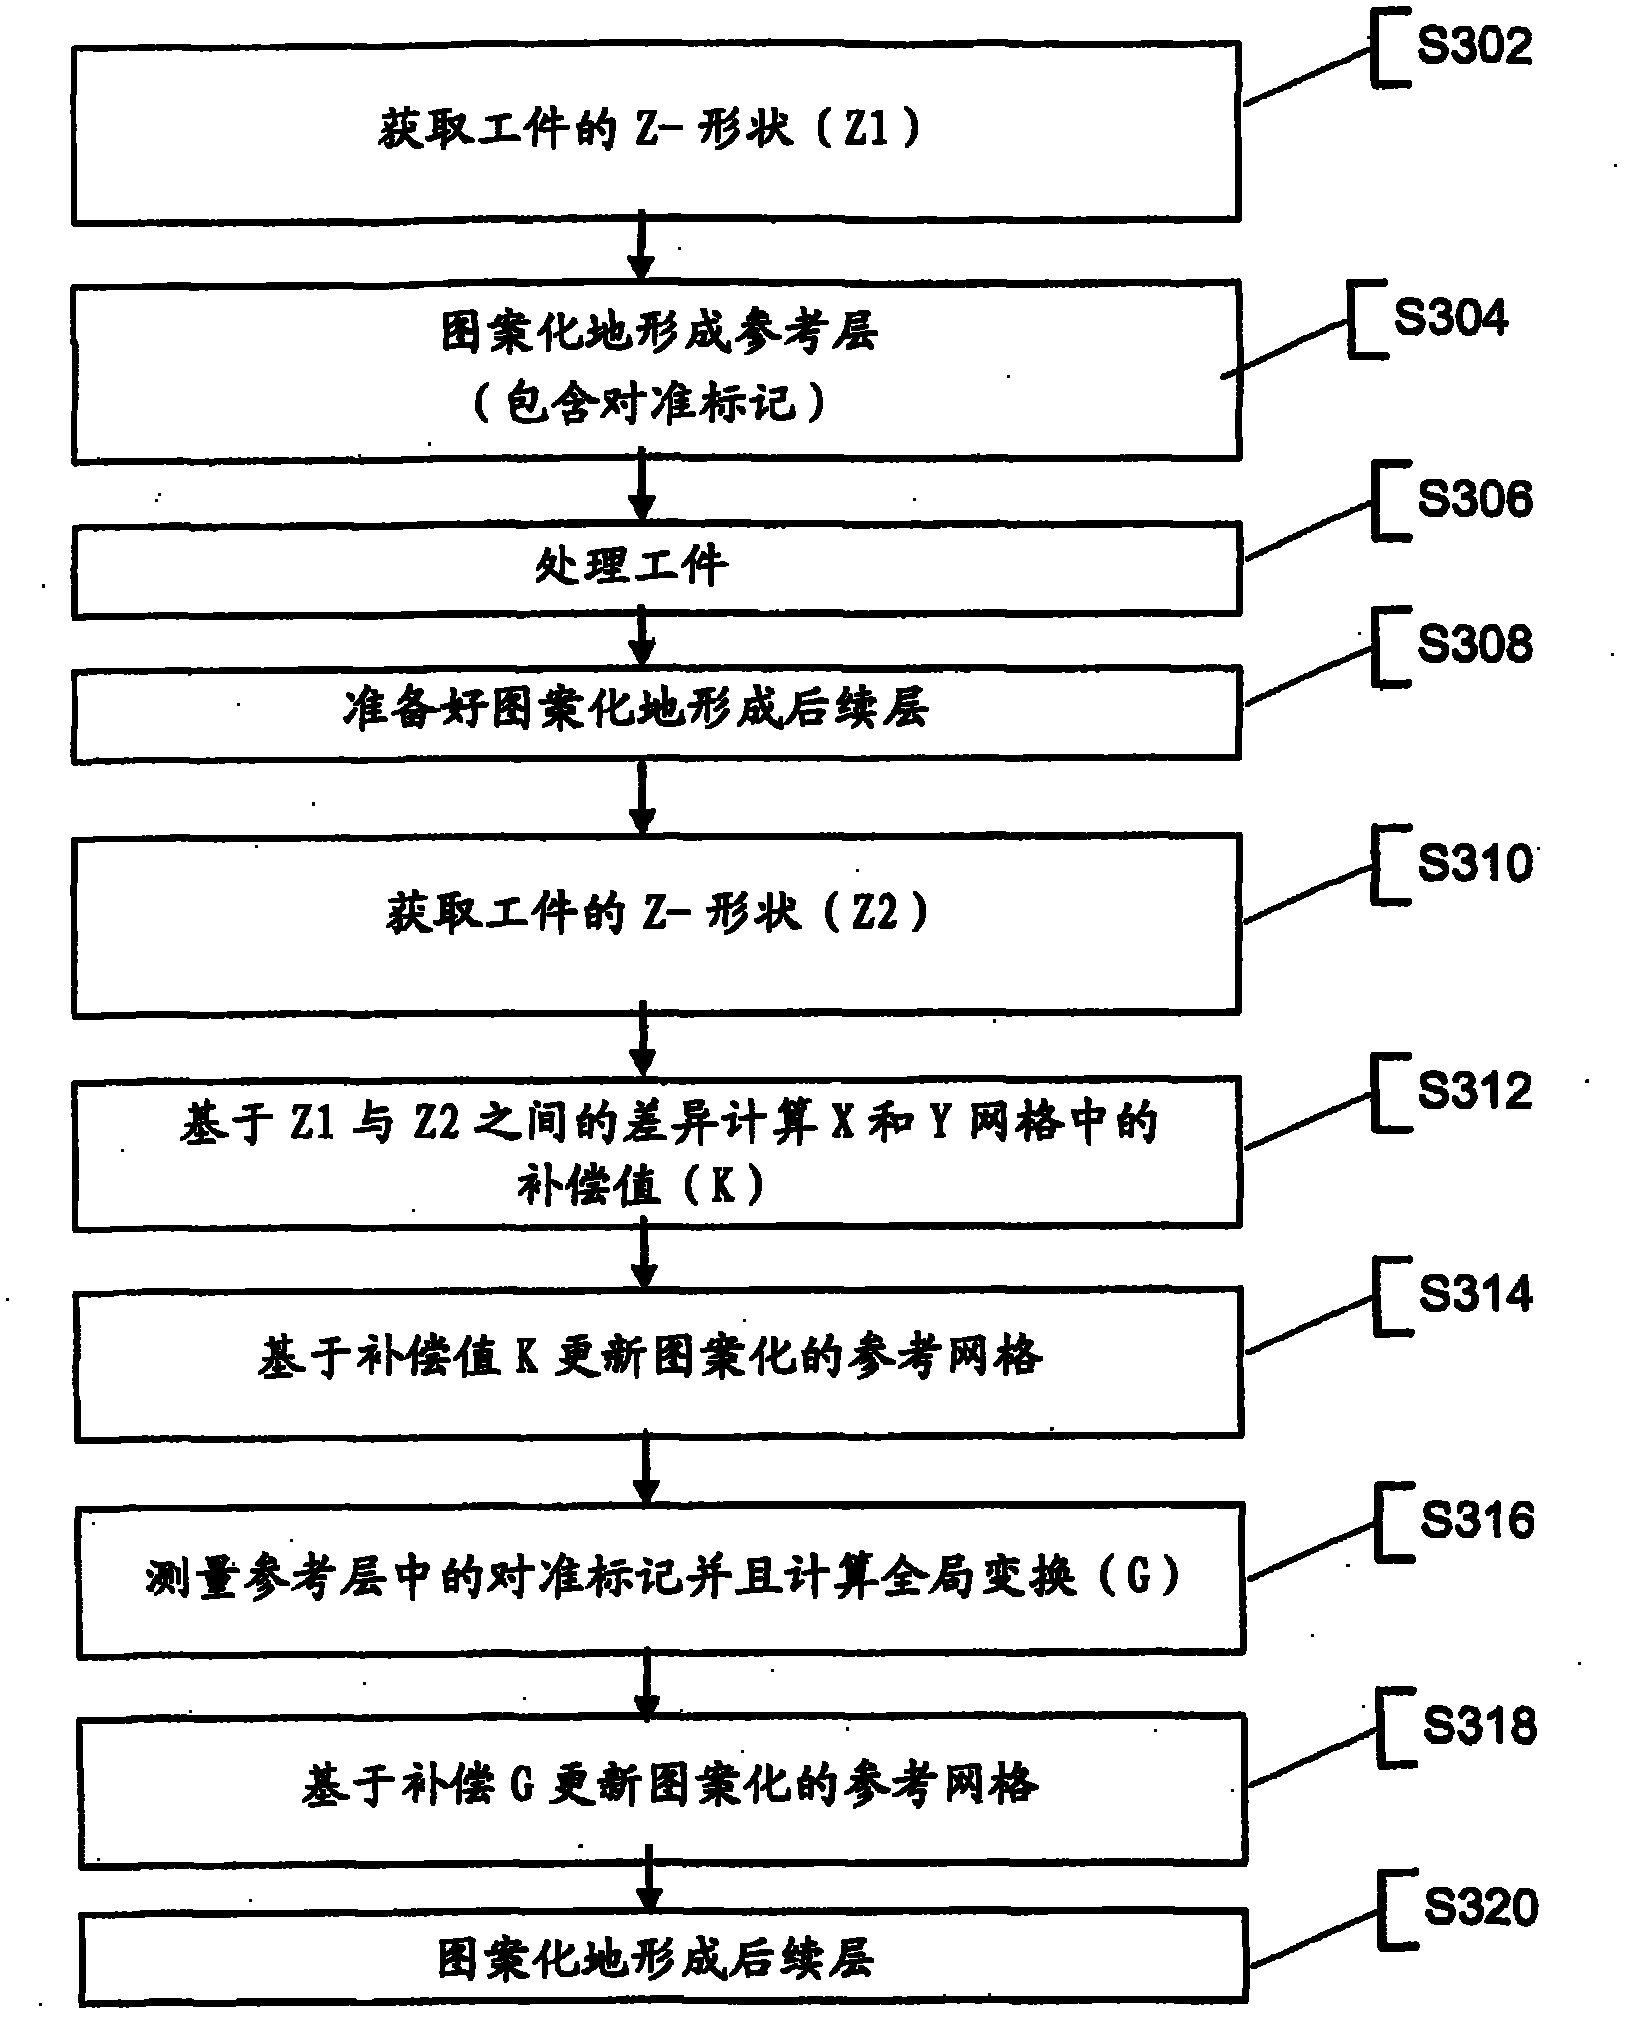 Method and apparatus for overlay compensation between subsequently patterned layers on workpiece